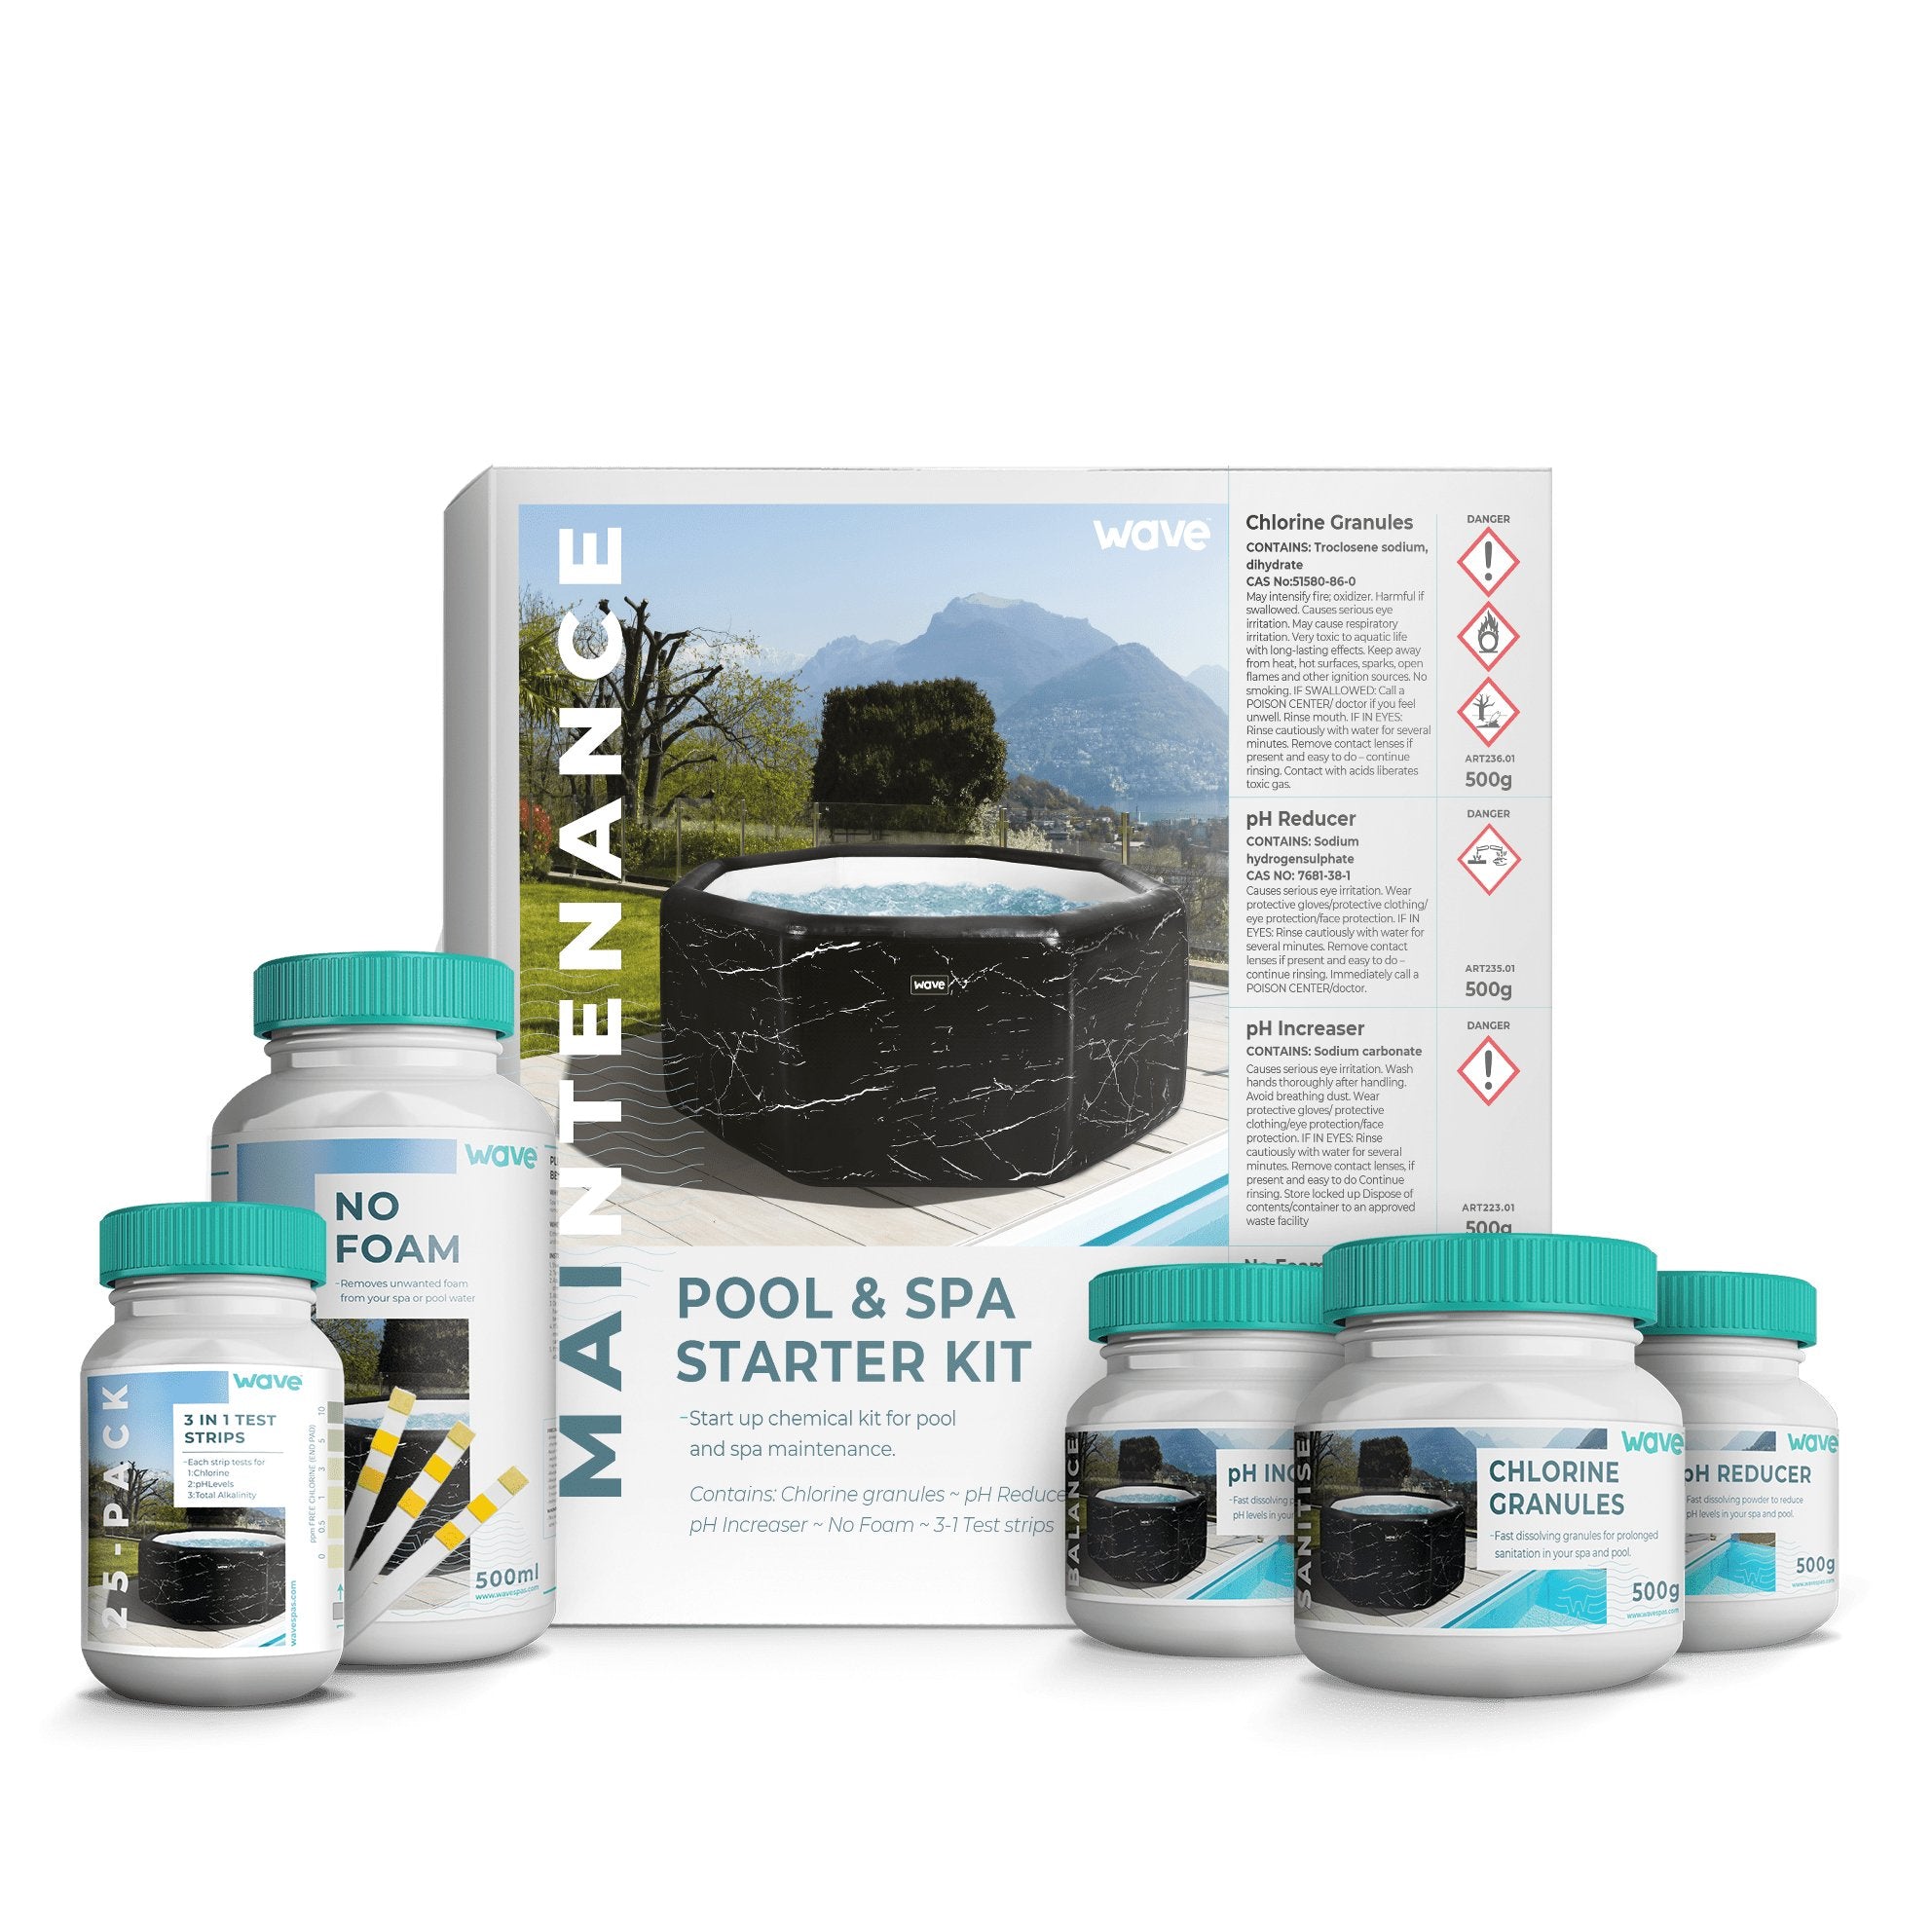 Hot Tub Chemical Starter Kit | The 500g Collection - Wave Spas Europe